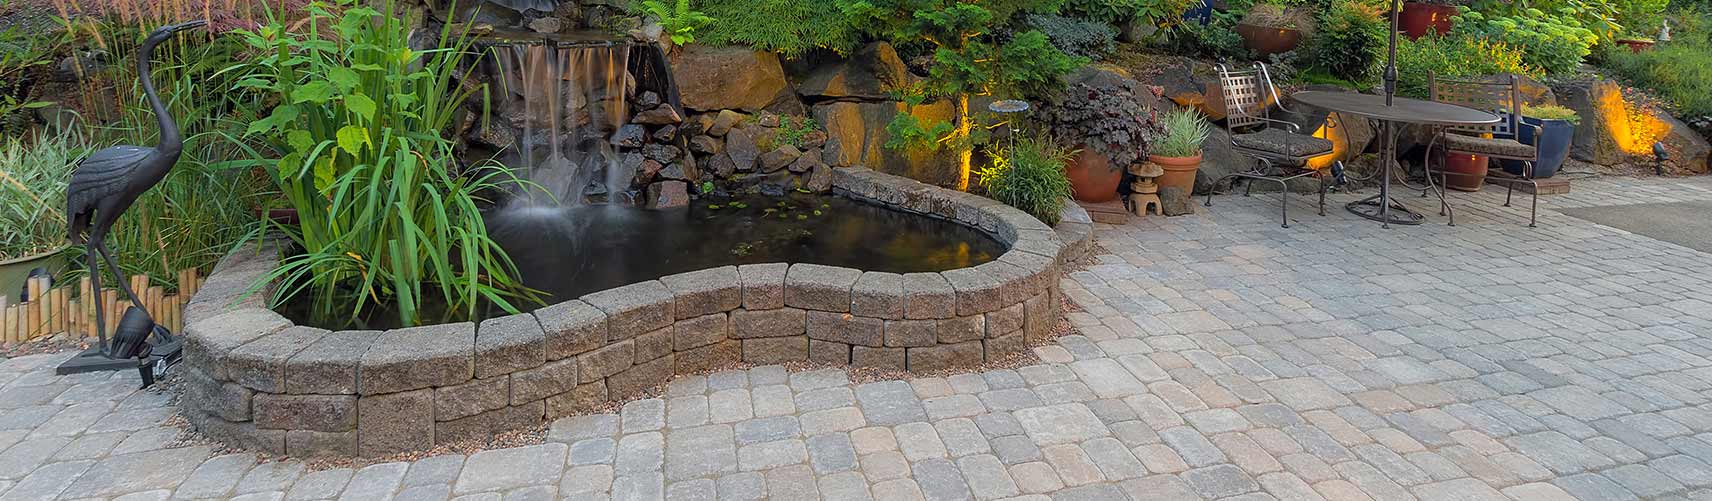 Bellevue Landscaping Company, Landscaper and Landscaping Services